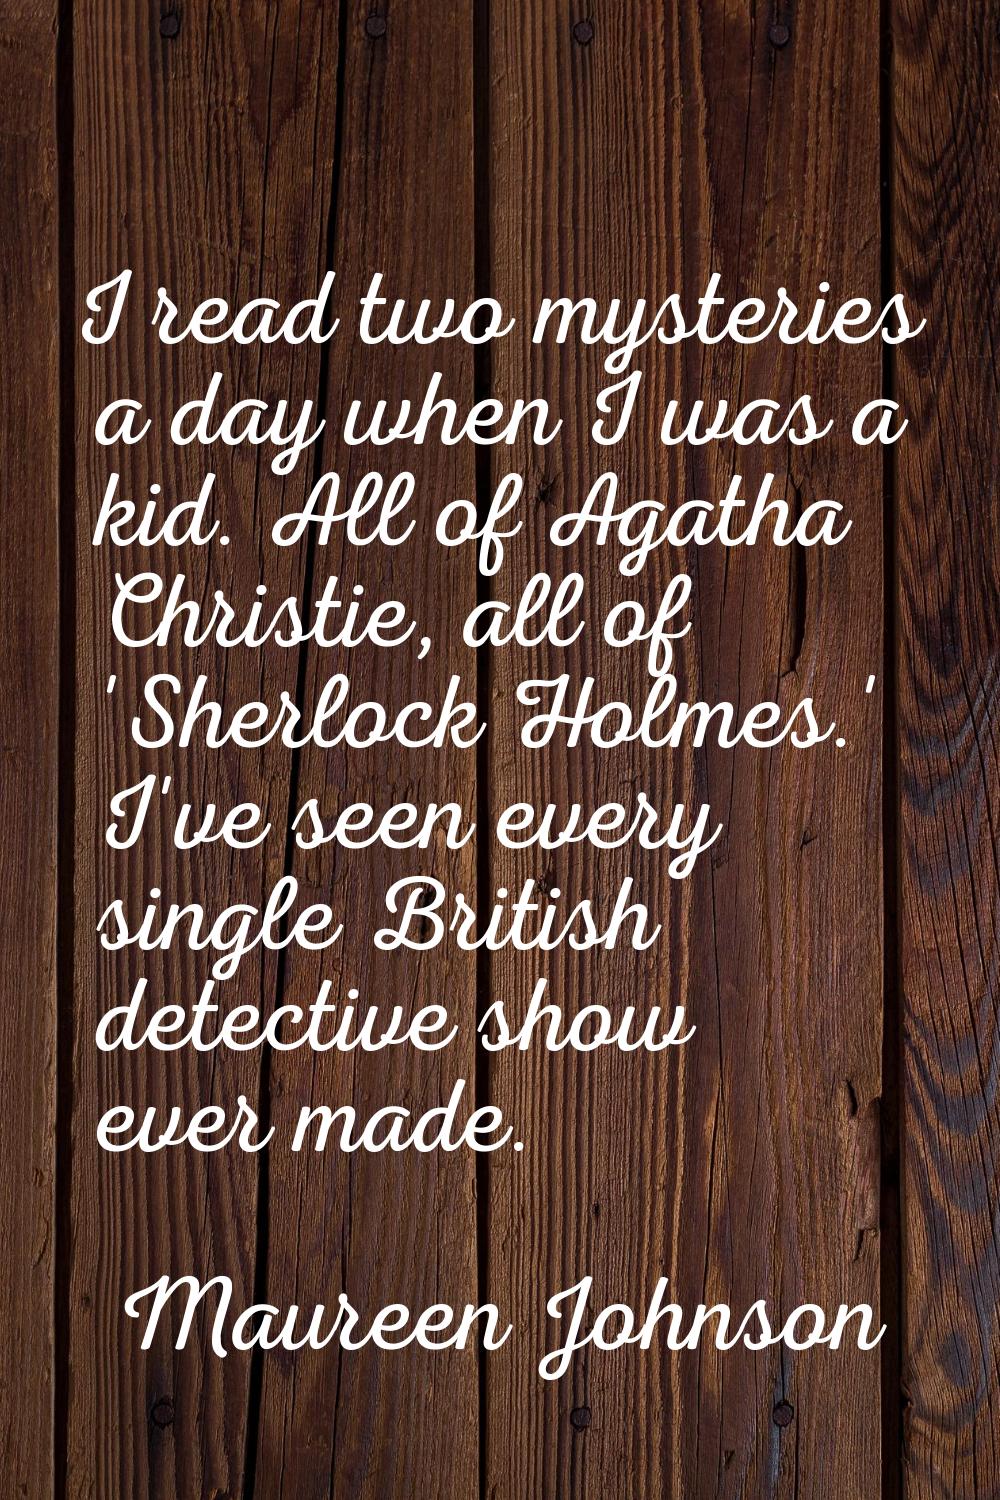 I read two mysteries a day when I was a kid. All of Agatha Christie, all of 'Sherlock Holmes.' I've